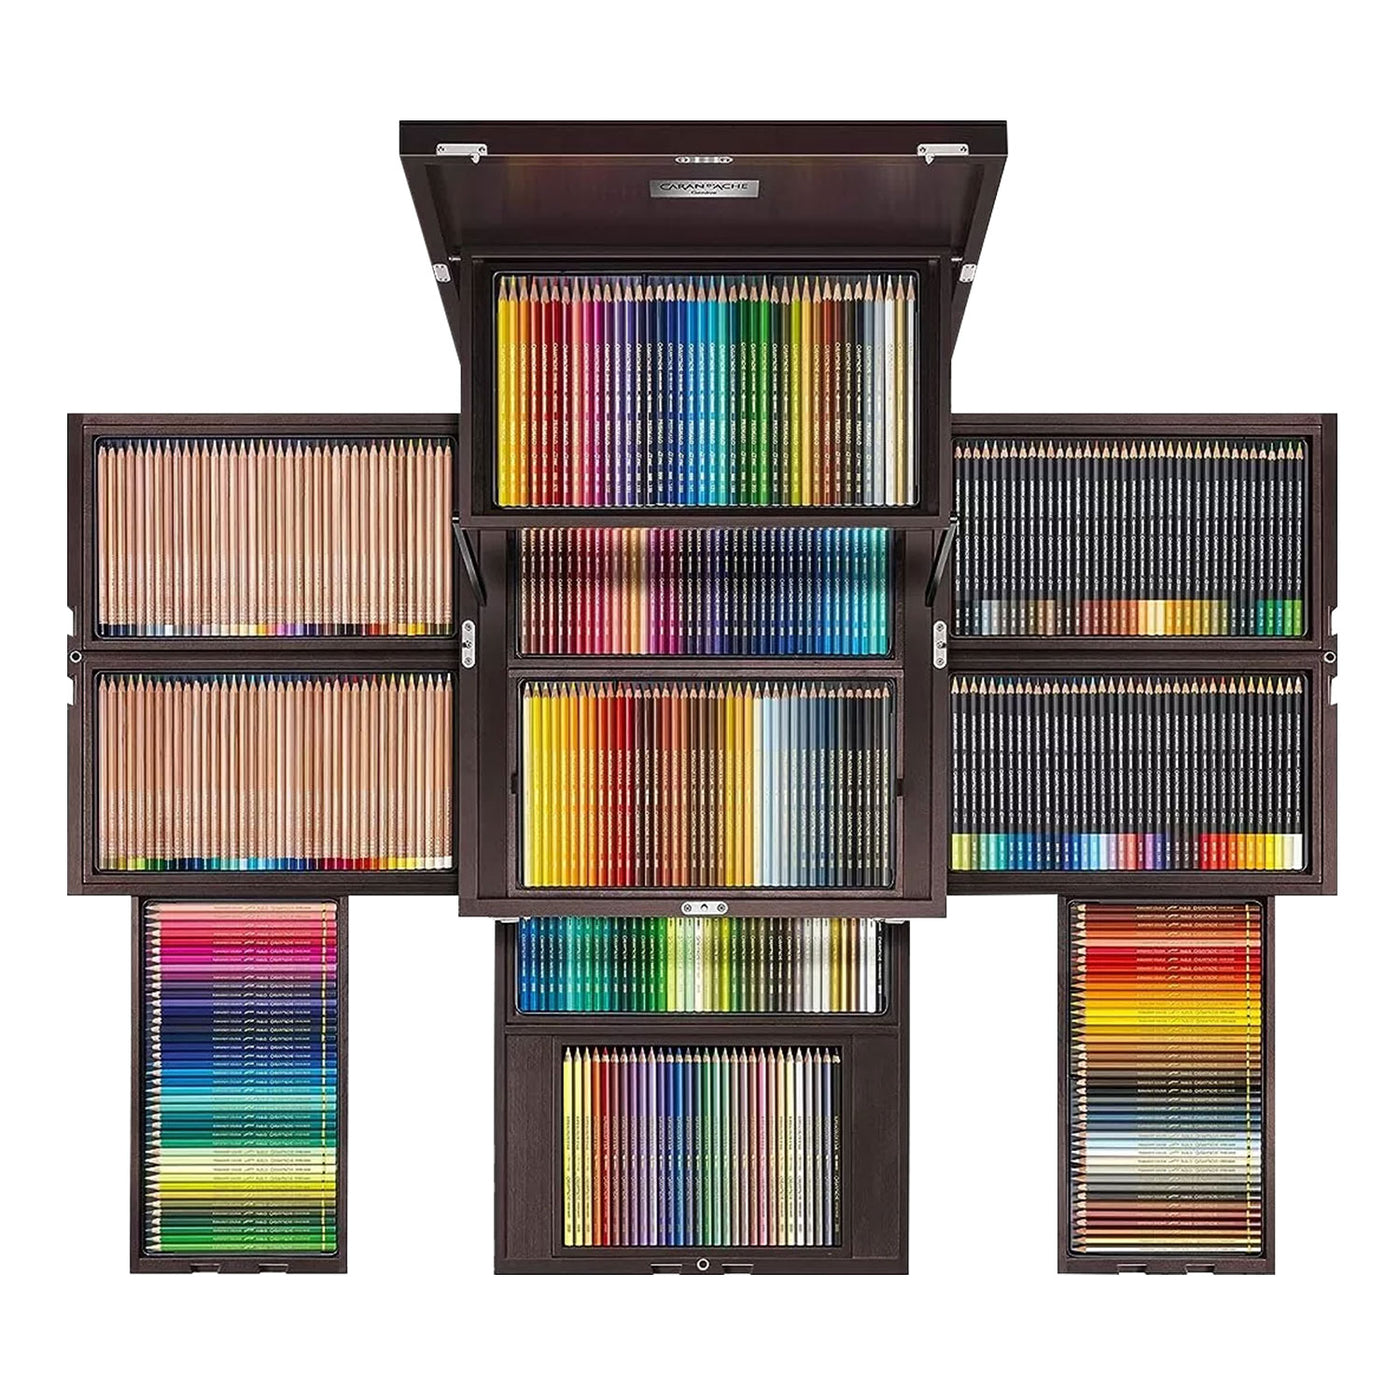 Caran d'Ache Treasure Chest of Colour - 30 Years of Supracolor Soft (Limited Edition) 1